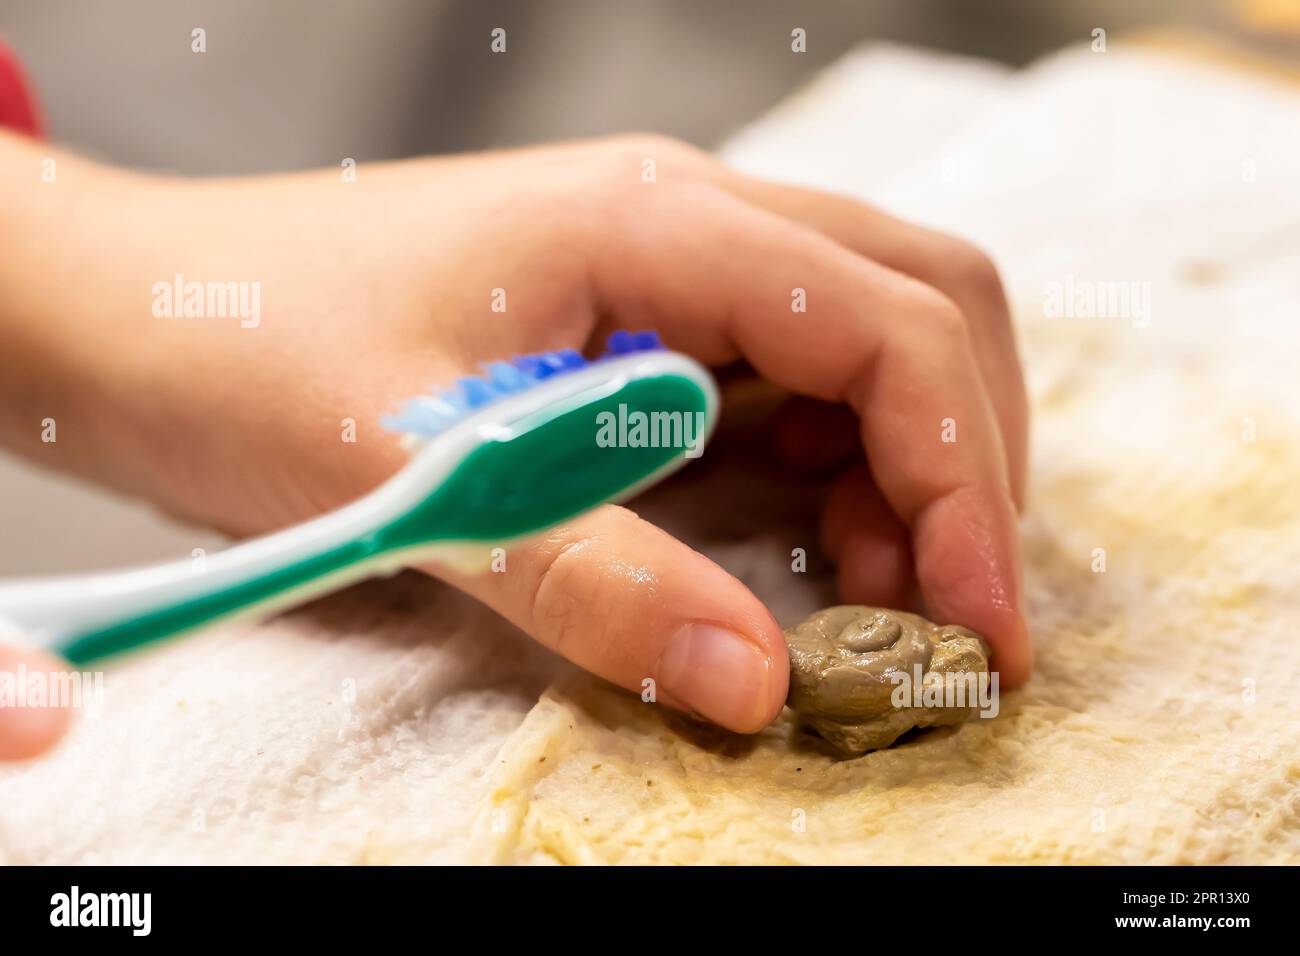 Cleaning gastropod fossil from Fossil & Prairie Park Preserve, Rockford, Iowa, USA Stock Photo